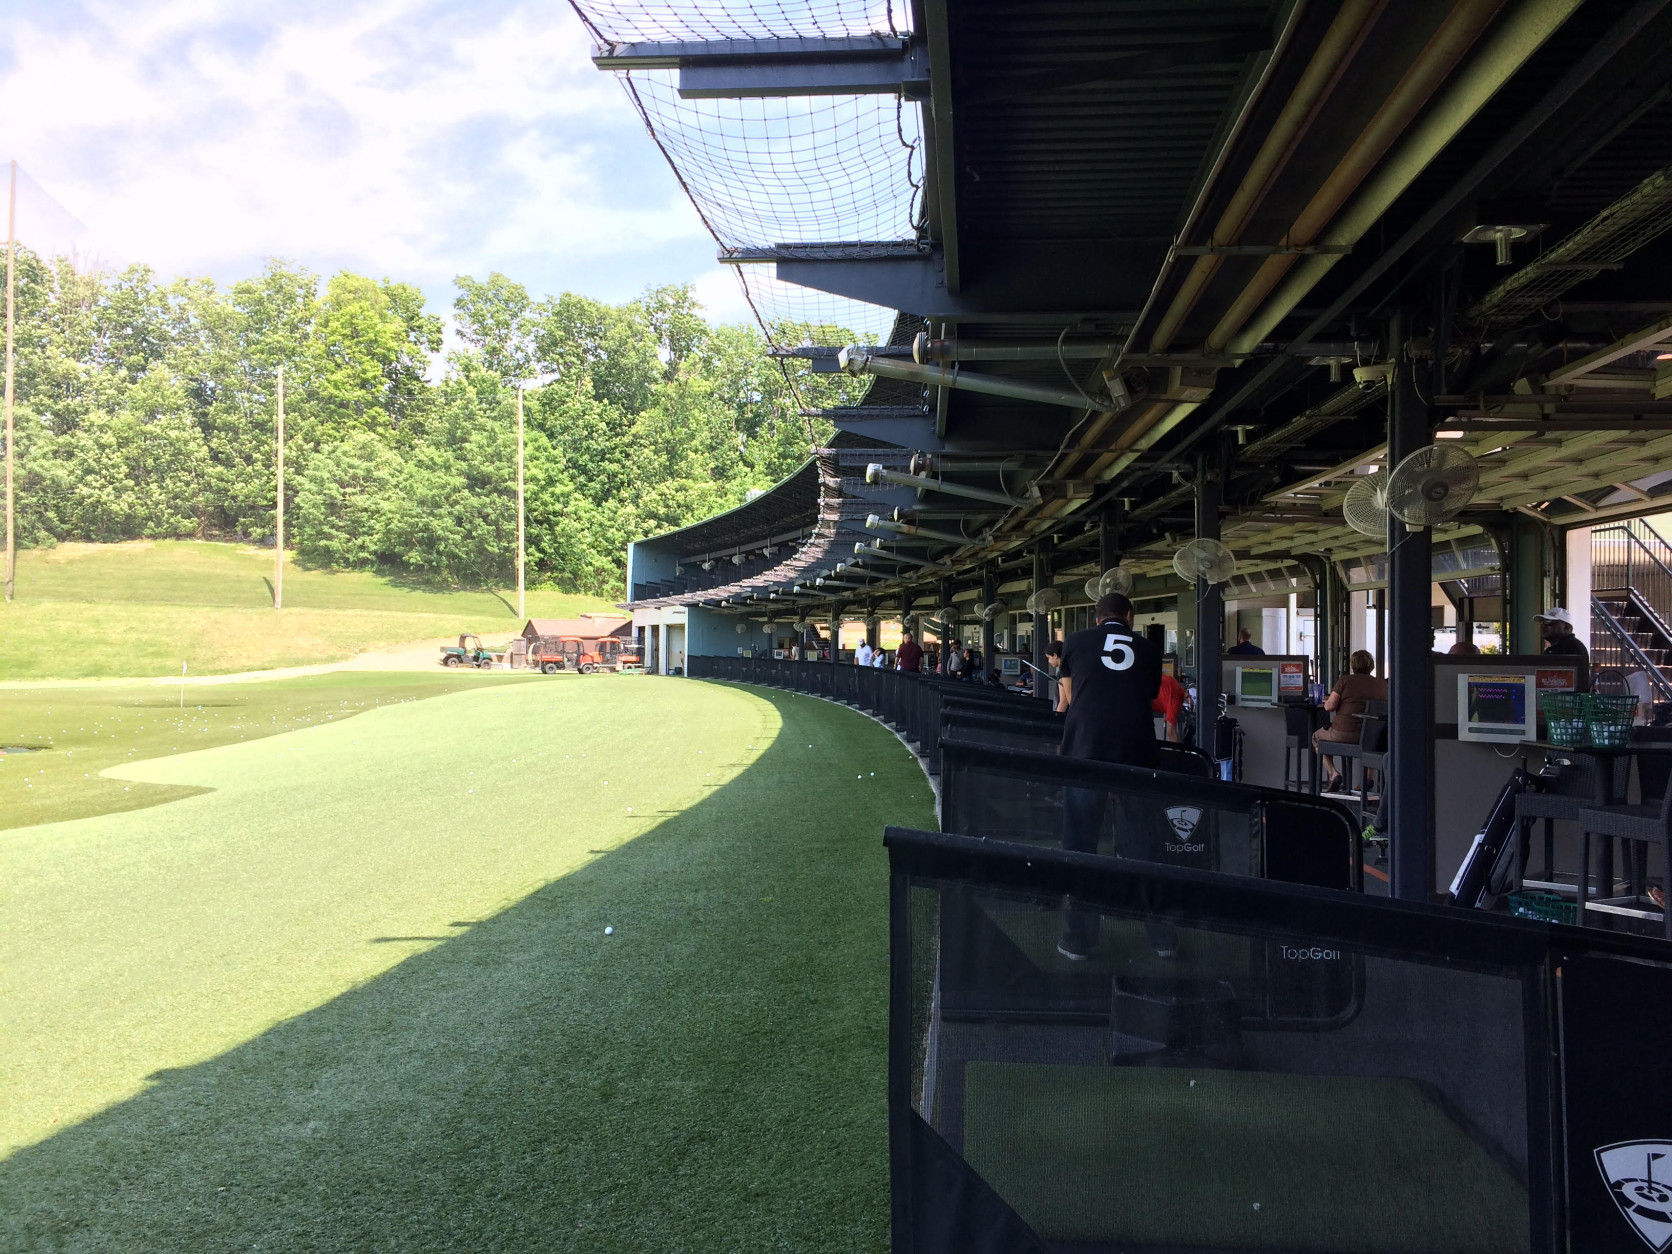 The Alexandria Topgolf location has two levels and 76 bays, compared to three levels and 106 bays at the Loudoun County location. (WTOP/Noah Frank)